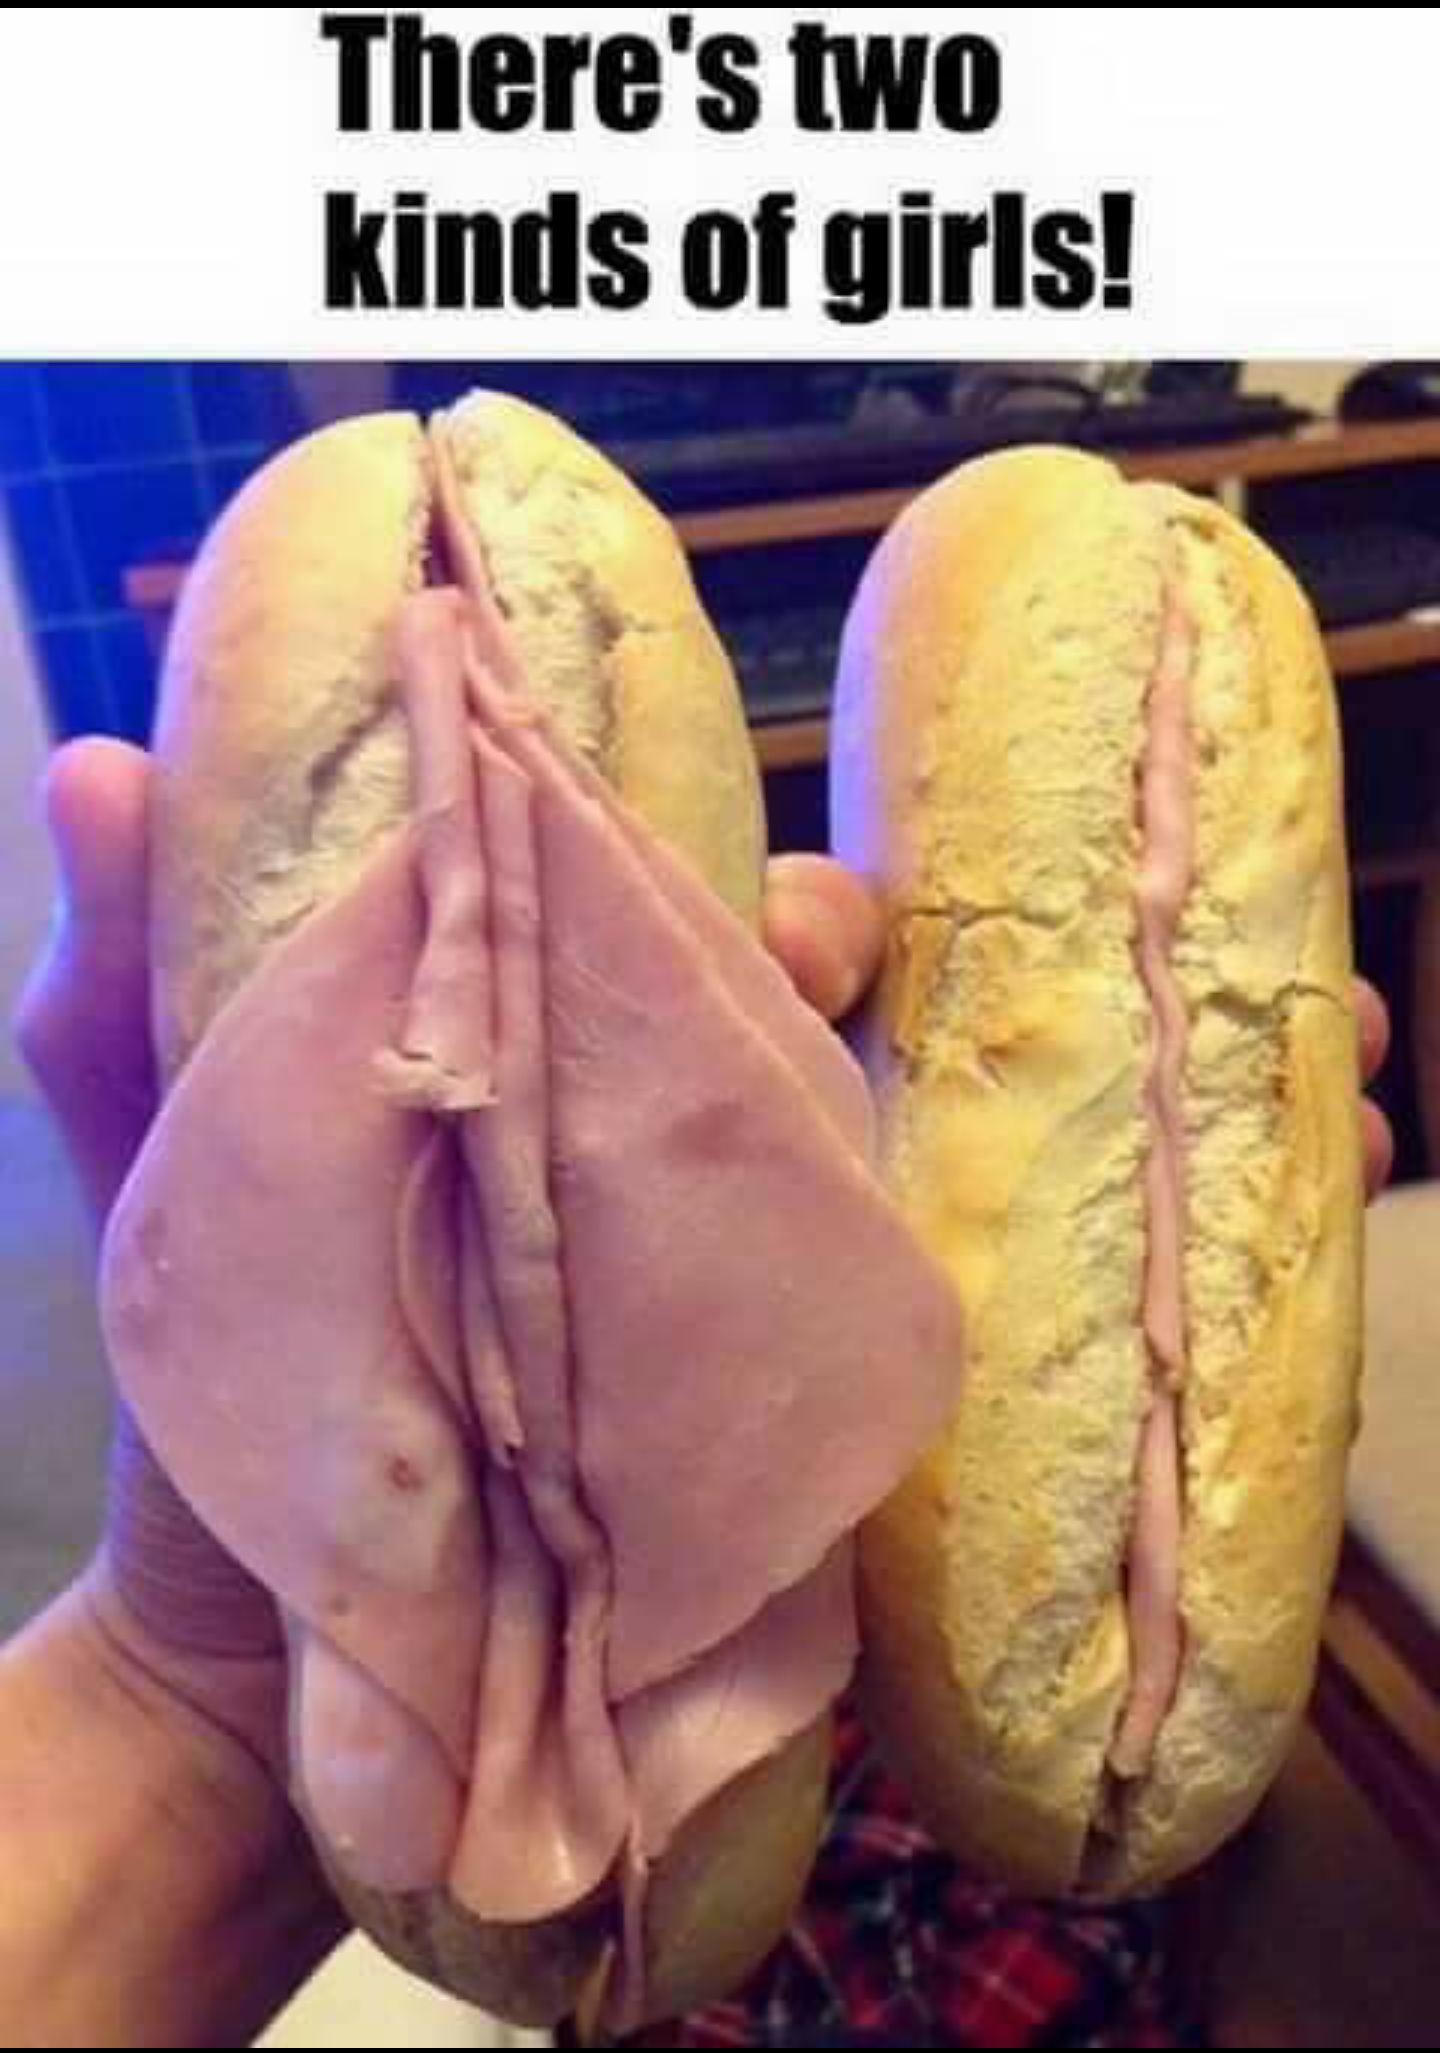 two types of girls sandwich - There's two kinds of girls!